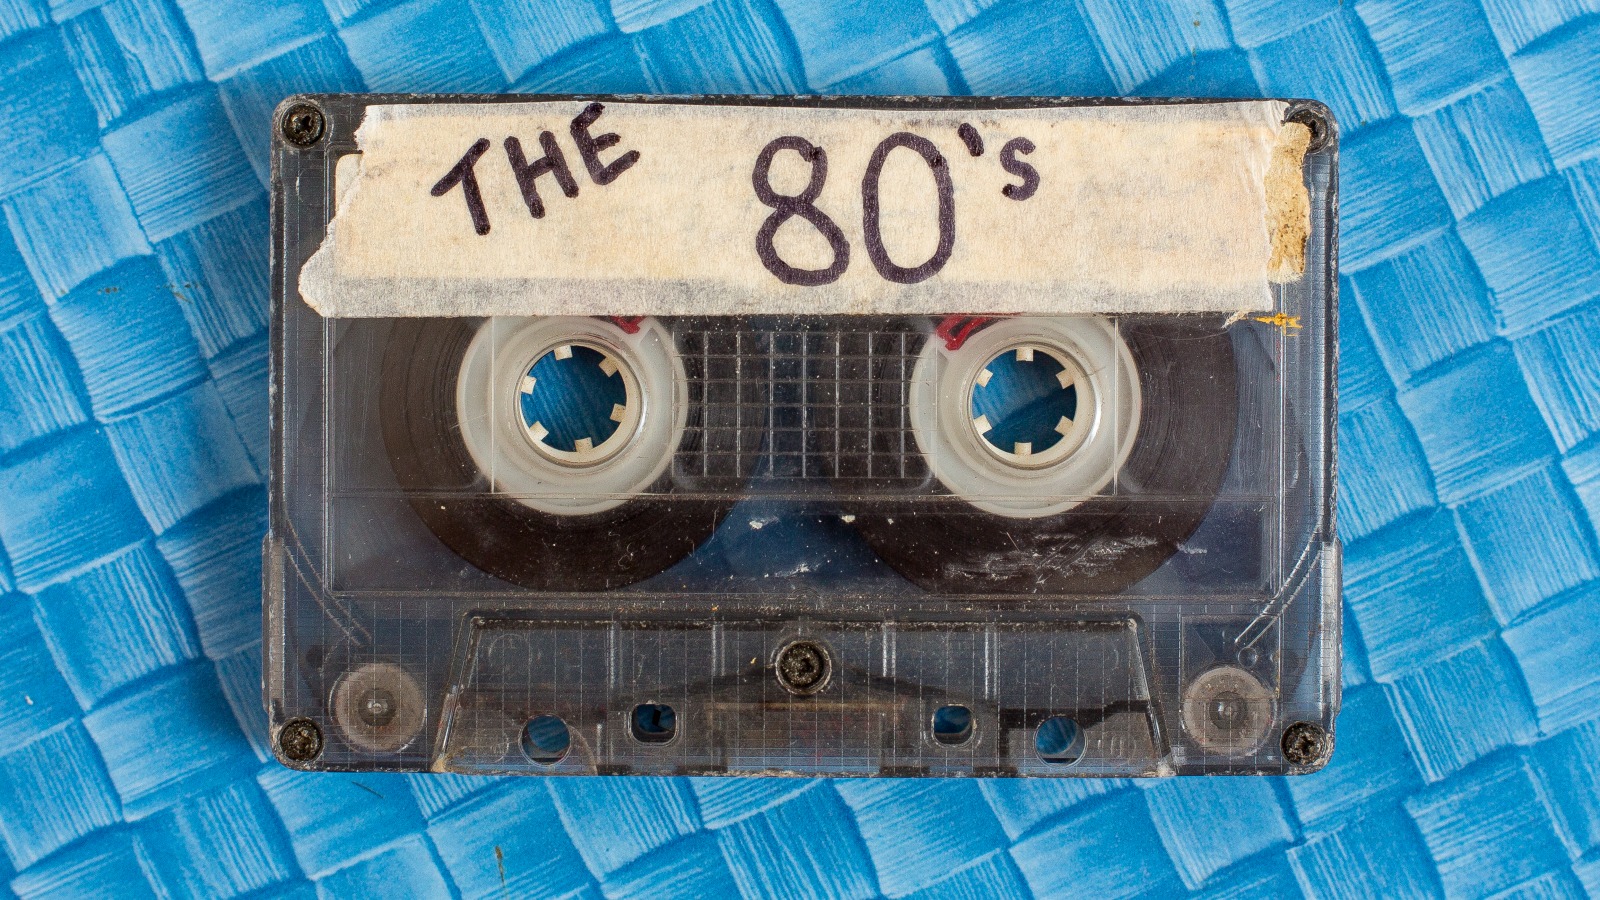 Things People Get Wrong About The 1980s